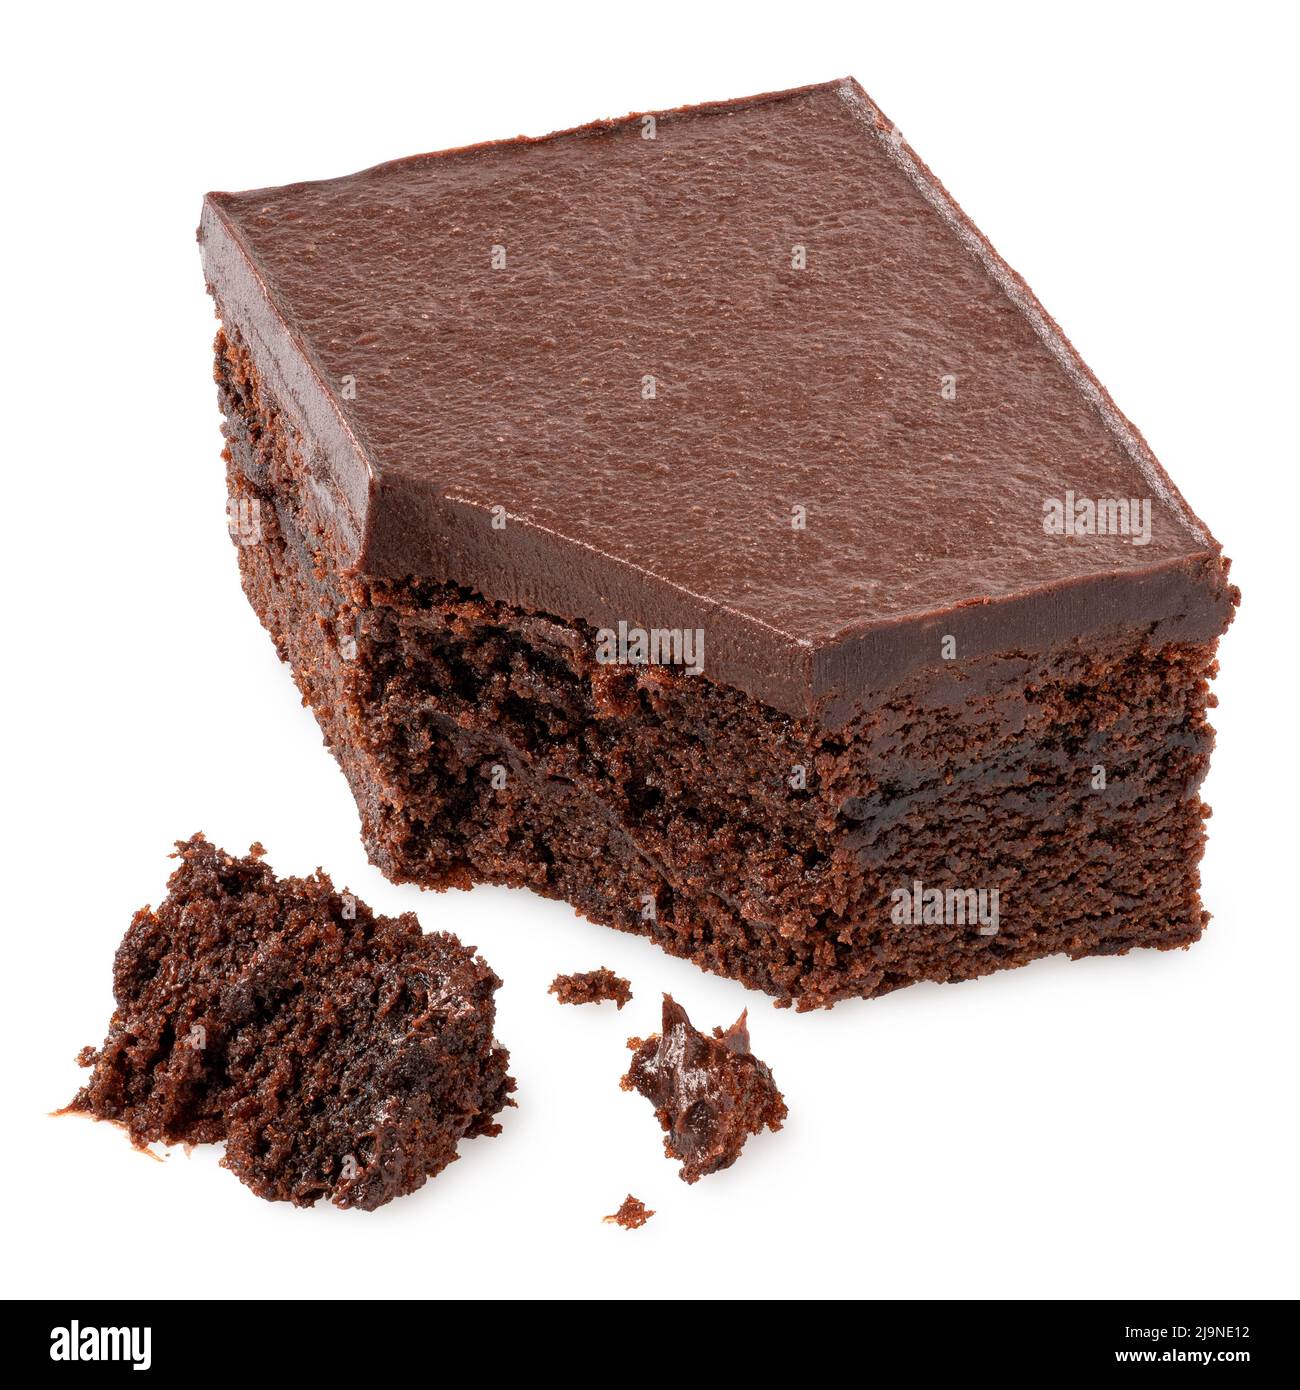 Chocolate cake square with chocolate icing isolated on white. Broken with crumbs. Stock Photo